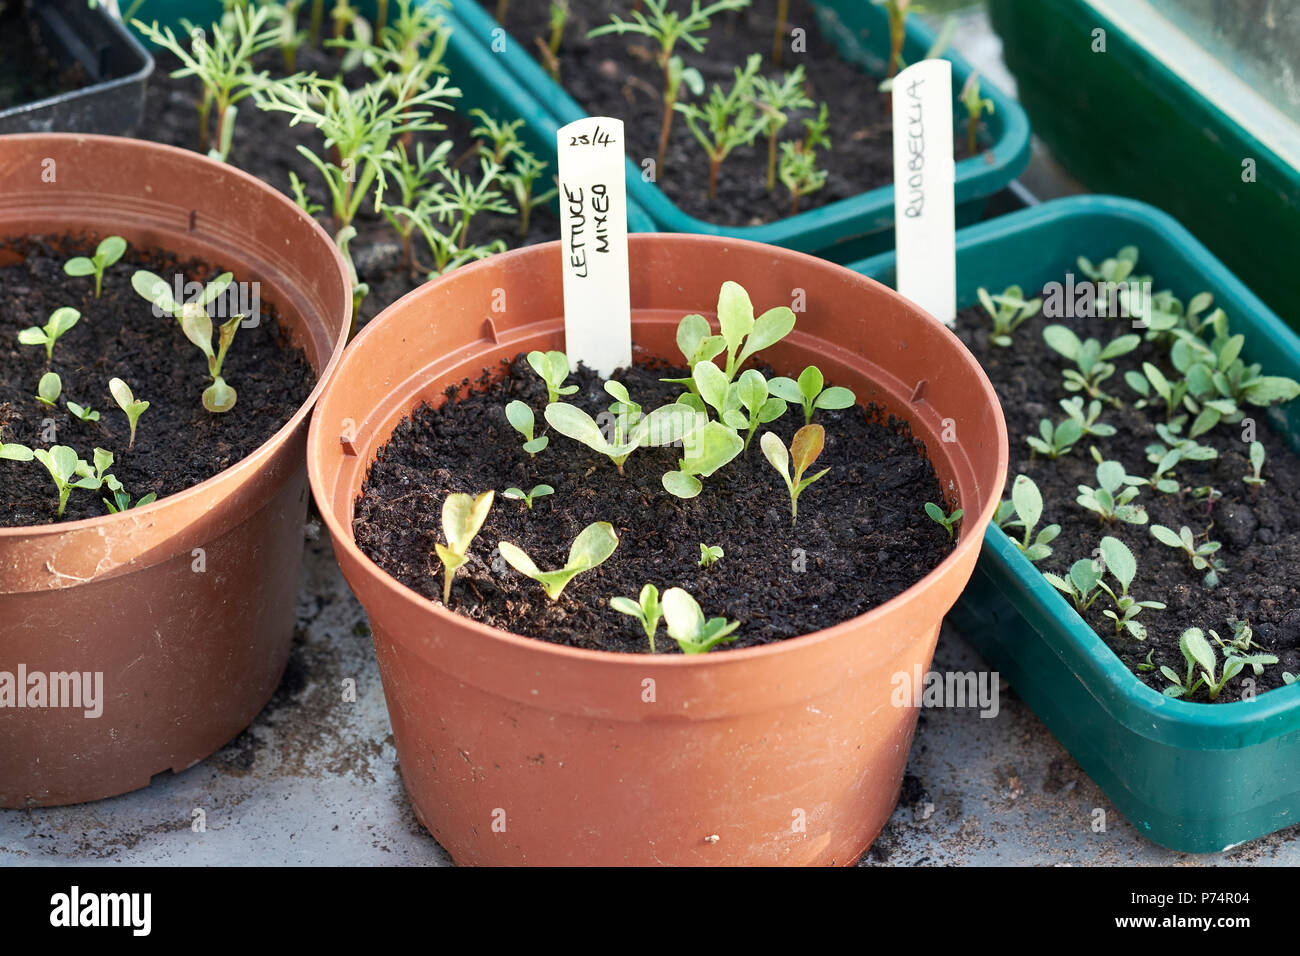 Mixed salad leaf and Rudbeckia seedling plants growing in compost filled plant pots on a metal bench in a greenhouse, UK. Stock Photo